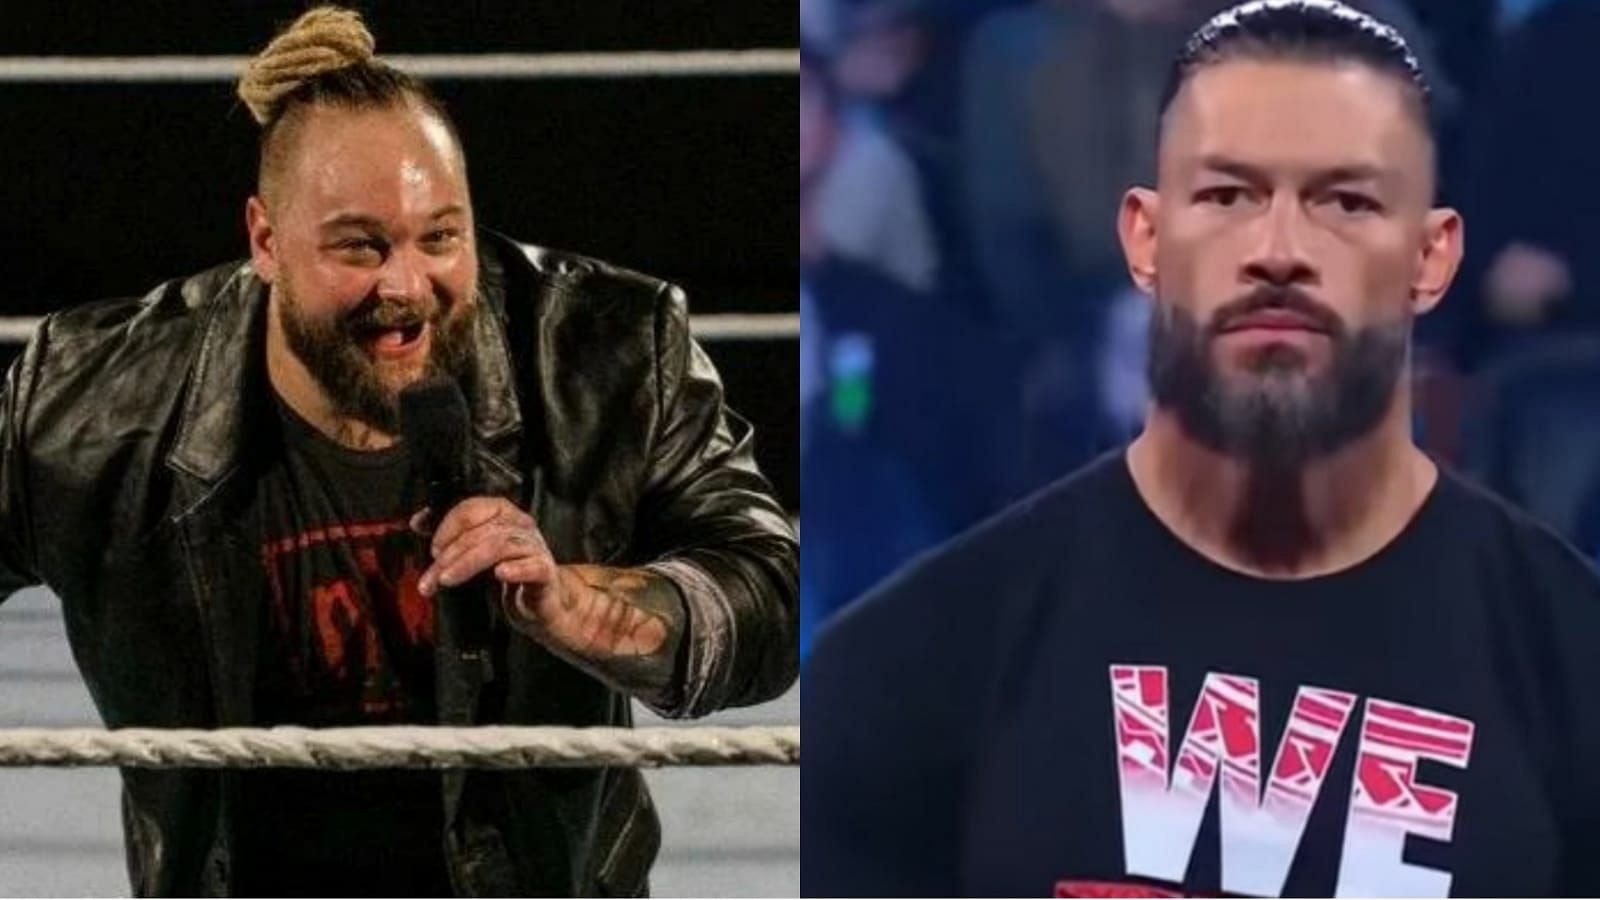 Bray Wyatt and Roman Reigns are members of WWE SmackDown!